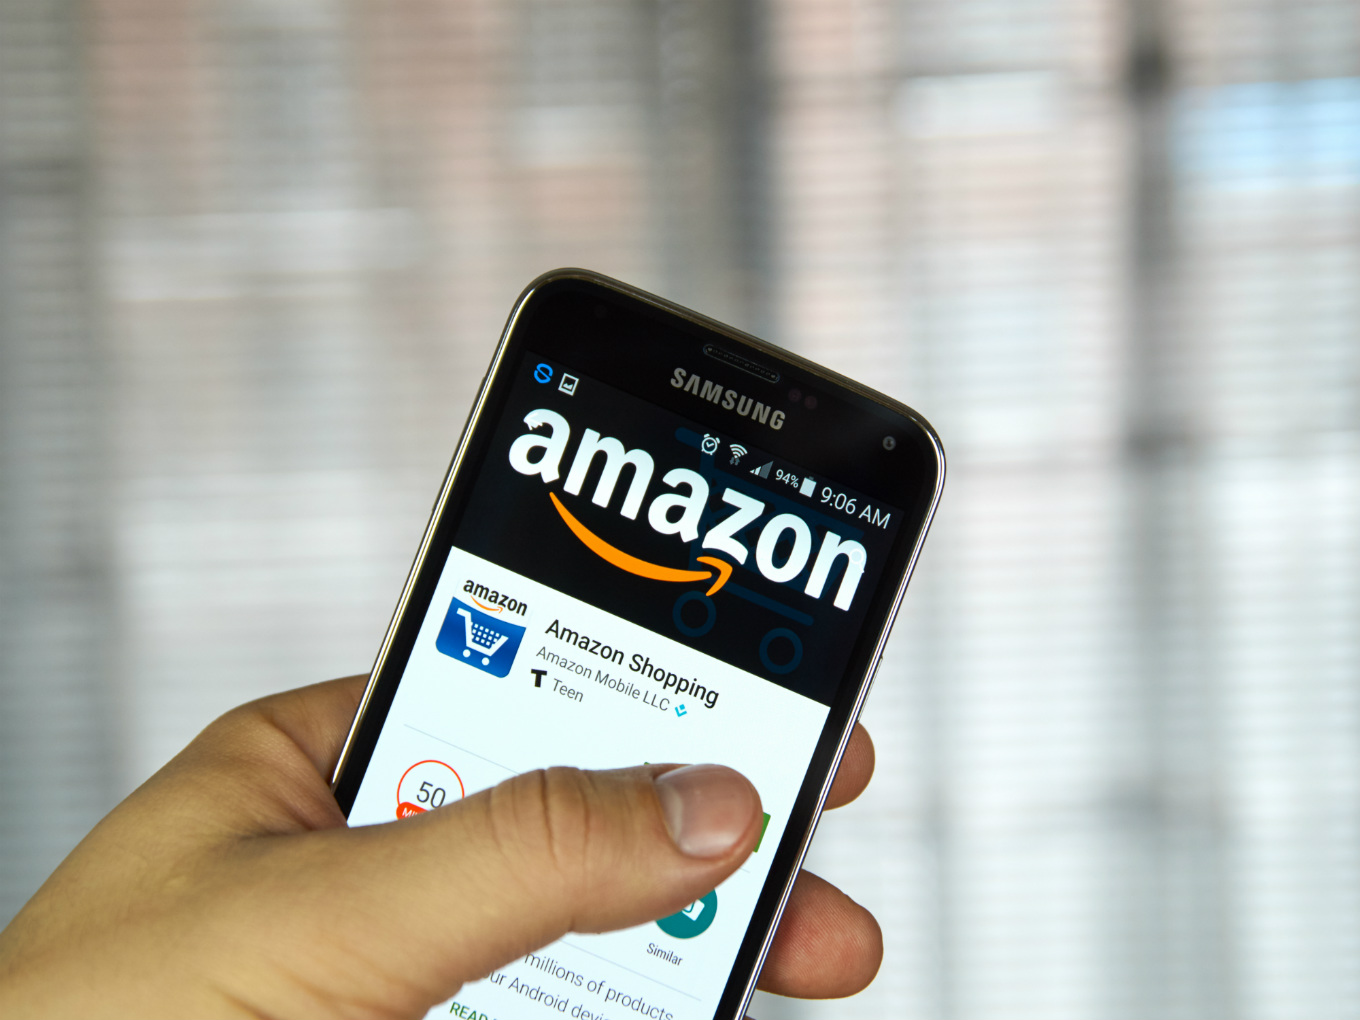 Amazon India Website Launched In Hindi For Android Users, Targets Smaller Cities